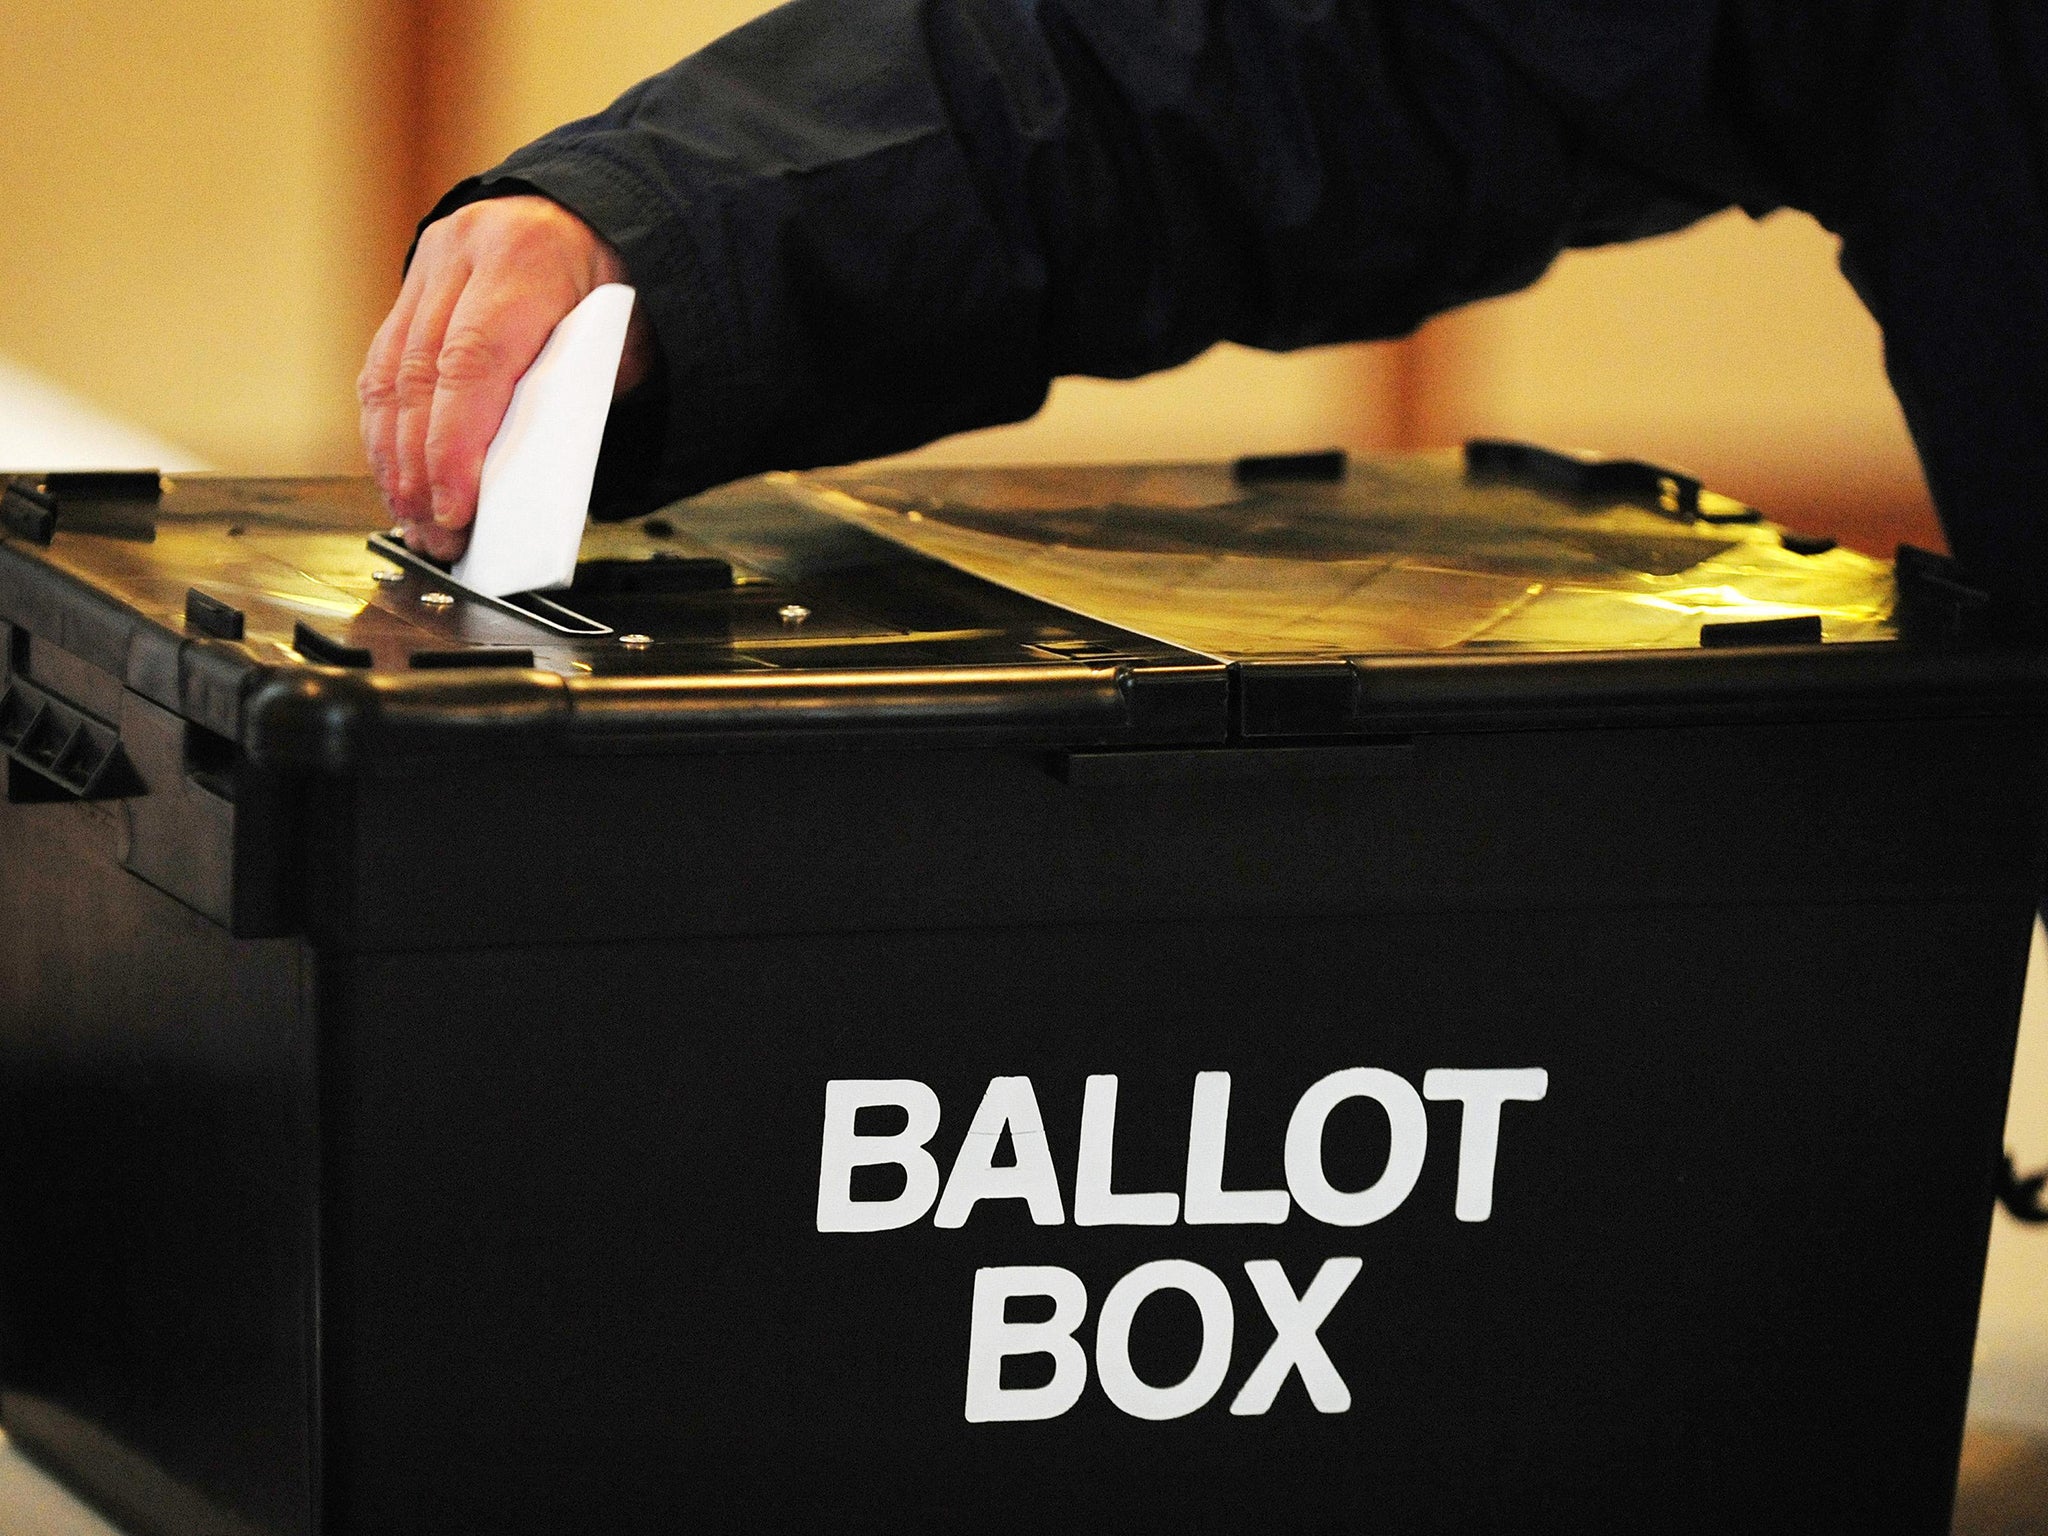 Having mandatory ID checks at polling stations would disenfranchise millions, says the ERS